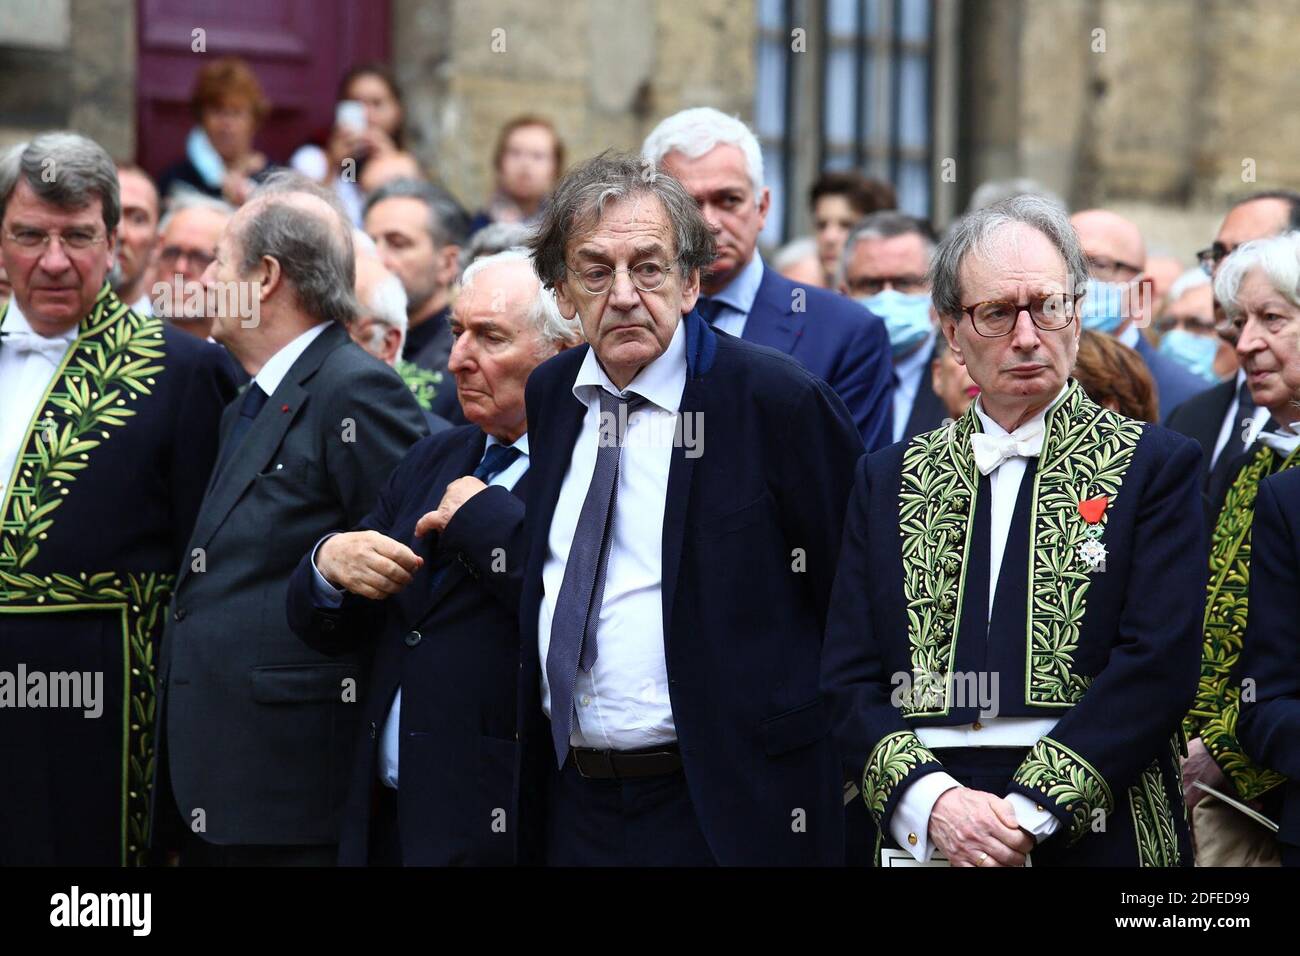 Alain Finkielkraut and Jean-Luc Marion at the funeral ceremony for French  historian and academician Marc Fumaroli at Saint-Germain-des-Pres church in  Paris, France on July 1, 2020. Fumaroli (10 June 1932 – 24